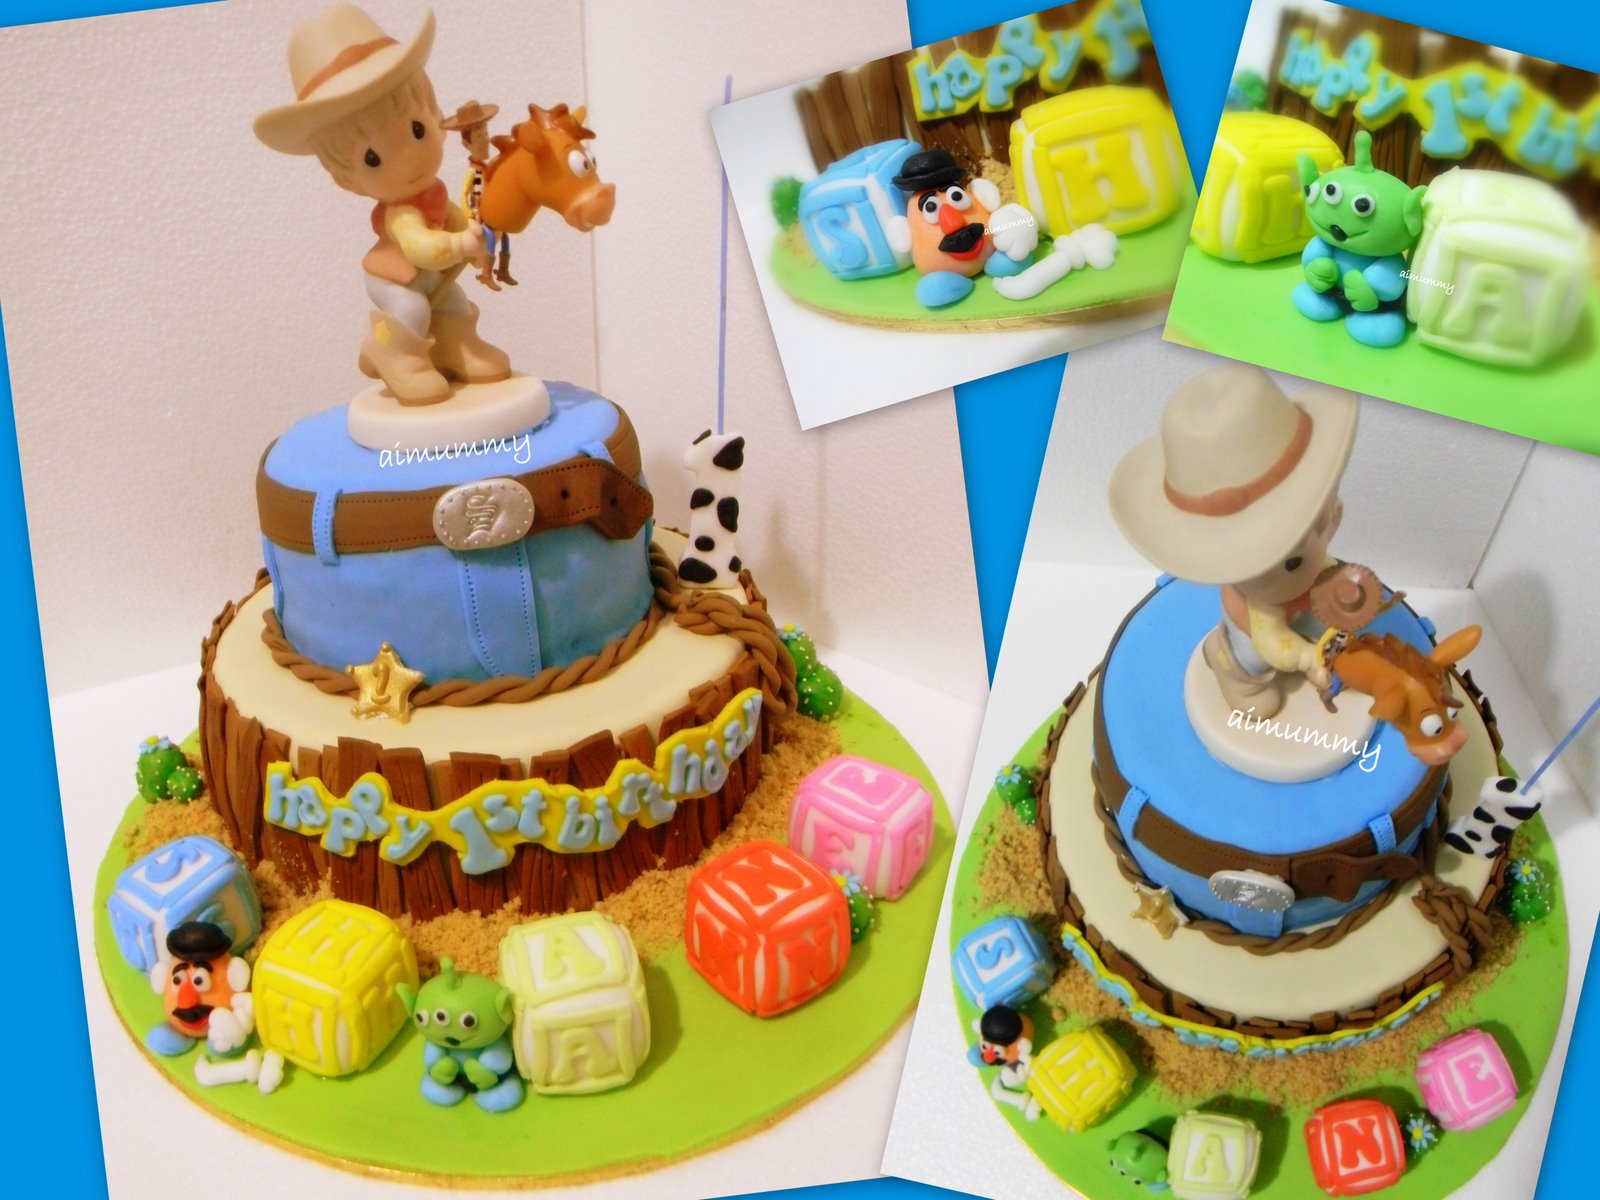 6 Photos of Toy Story Themed 1st Birthday Cakes